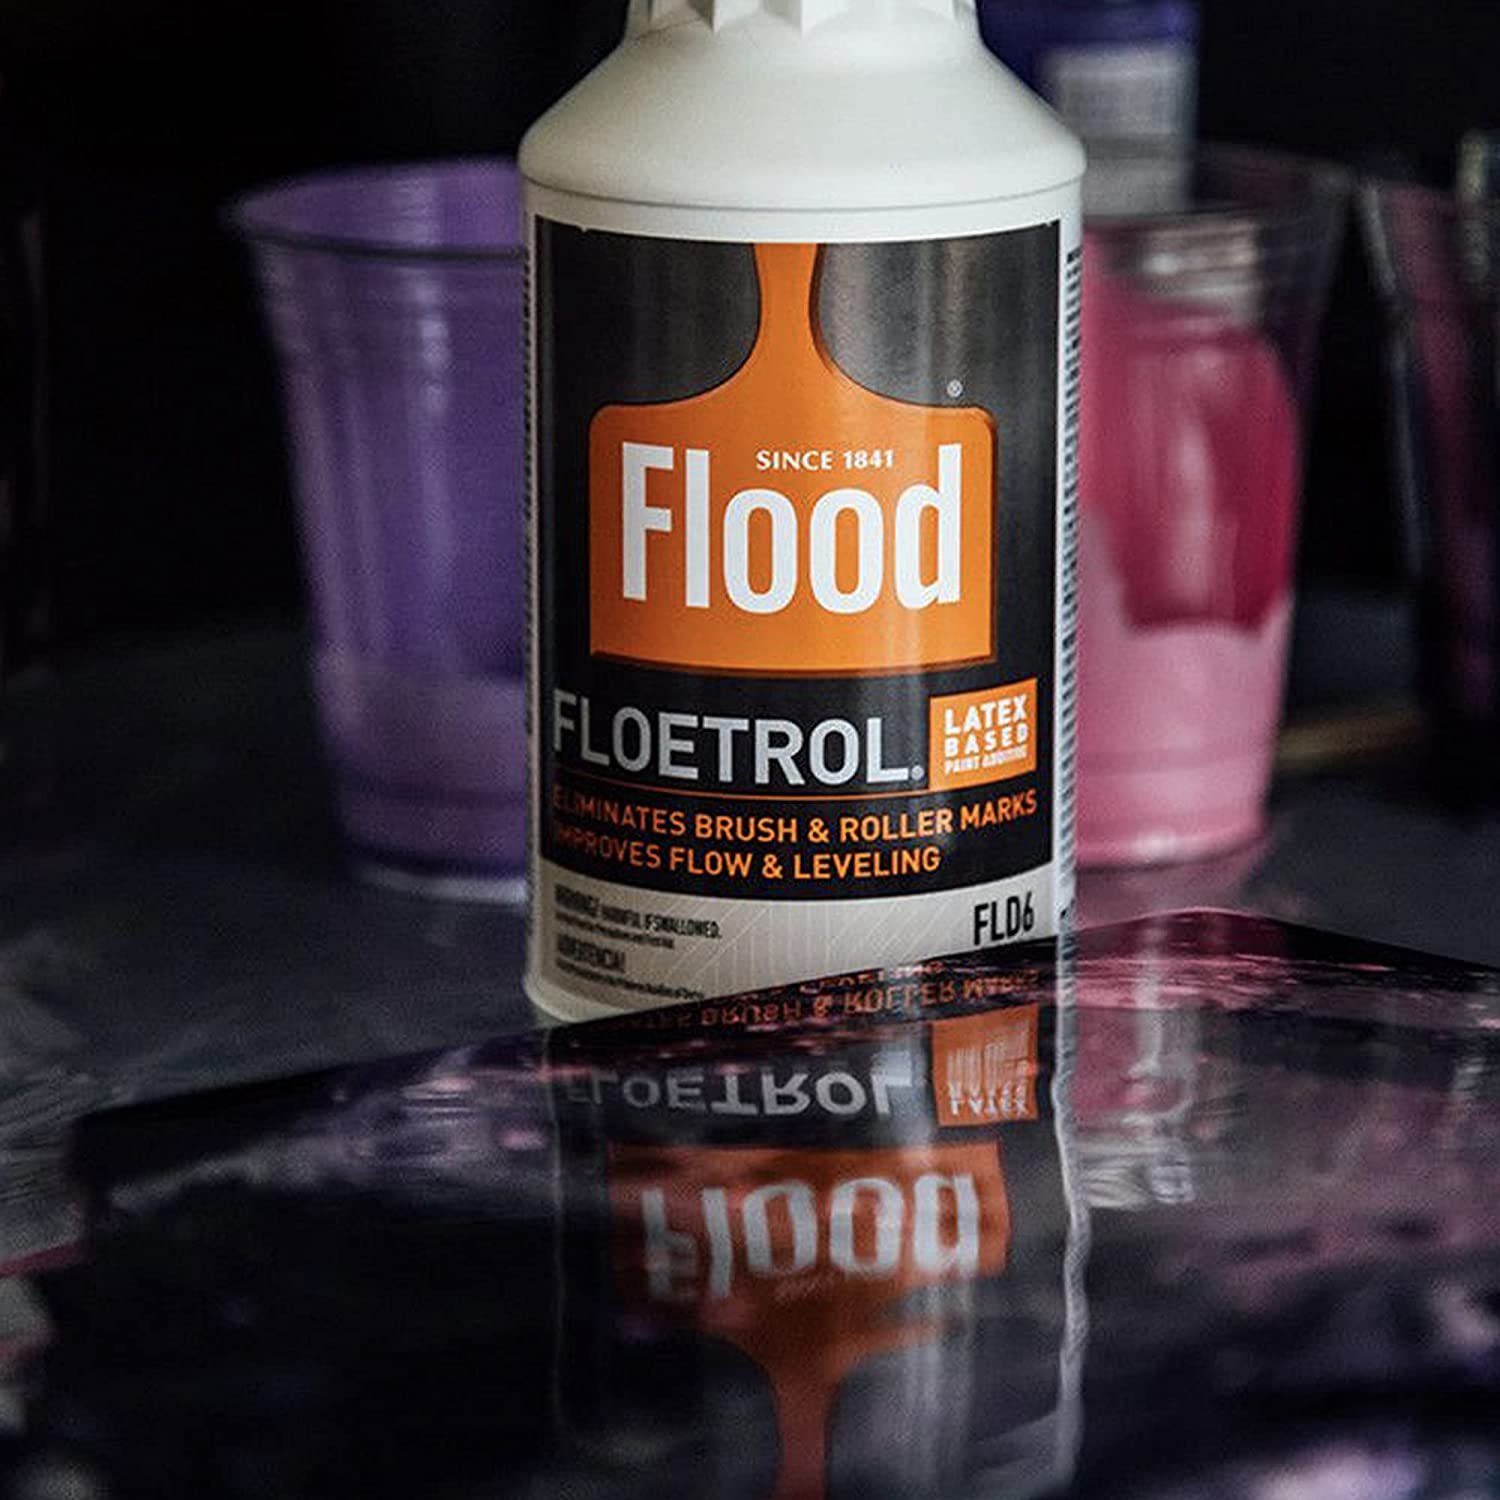 Floetrol Pouring Medium for Acrylic Paint  Flood Flotrol Additive  Pixiss Acrylic Pouring Oil for Creating Cells Perfect Flow 100% Pure High Grade Silicone 100ml/3.3-Ounce - image 3 of 8